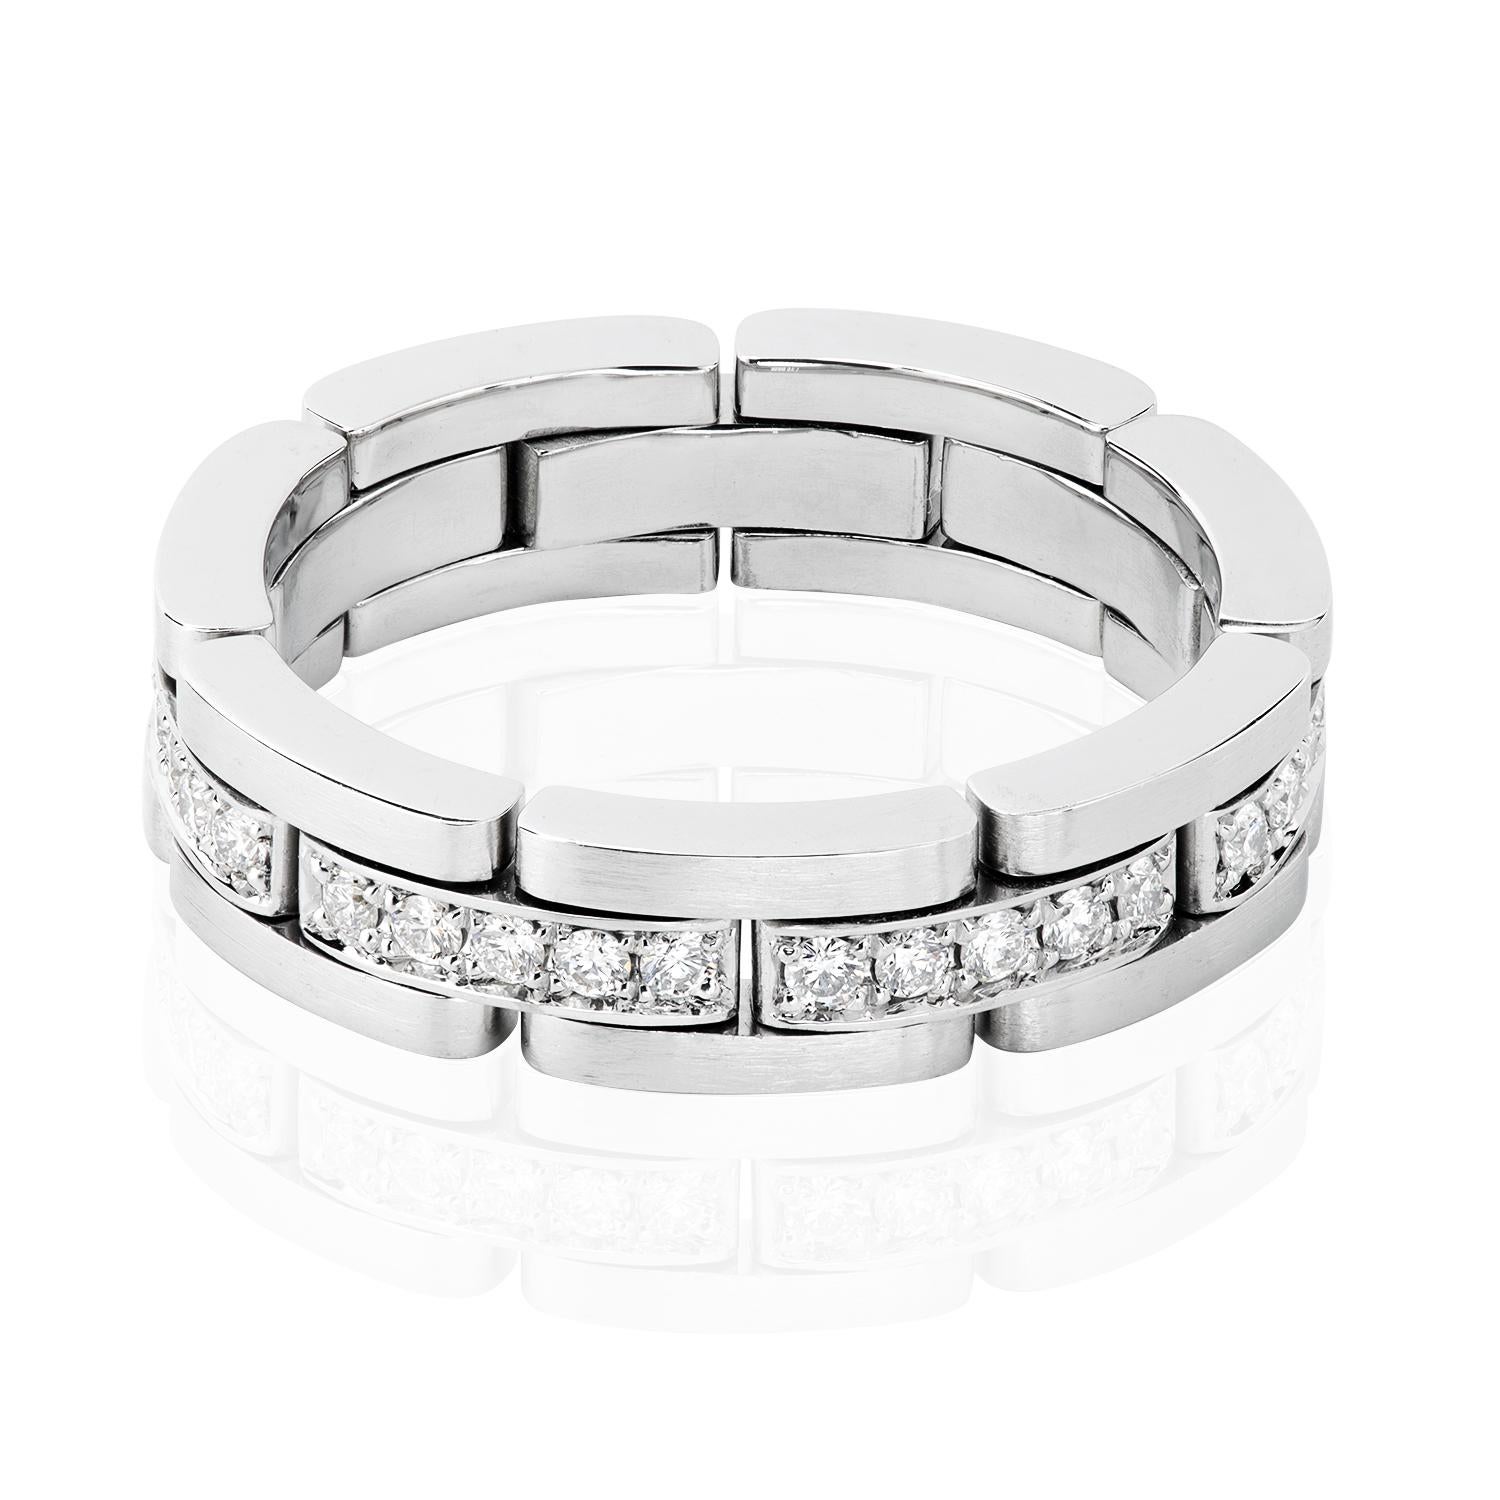 Leon Megé hinged wedding band is made from Rolex-grade platinum encrusted with dazzling diamonds. Each joint is completely flexible and moves independently, providing a silky smooth feel.

35 full-cut natural diamonds F/VS 0.55 carats
The band is